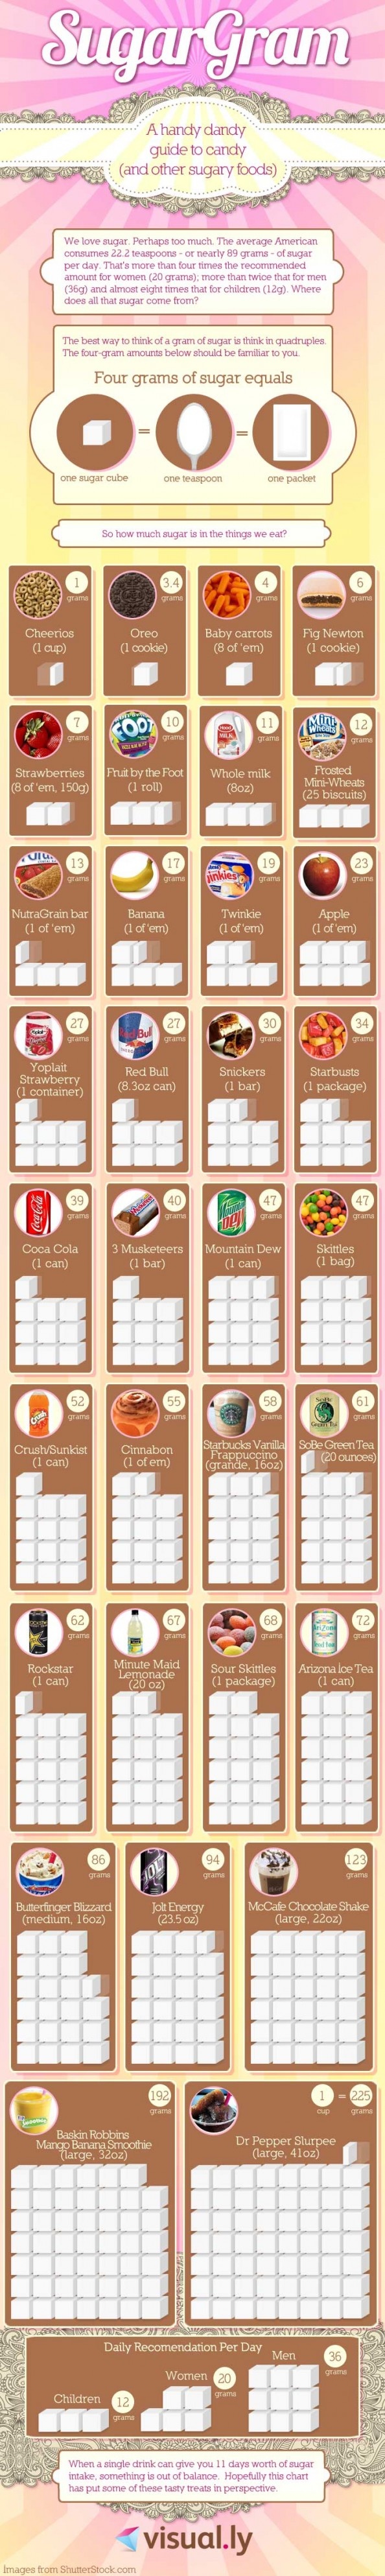 A Handy Dandy Guide To Candy: Infographic